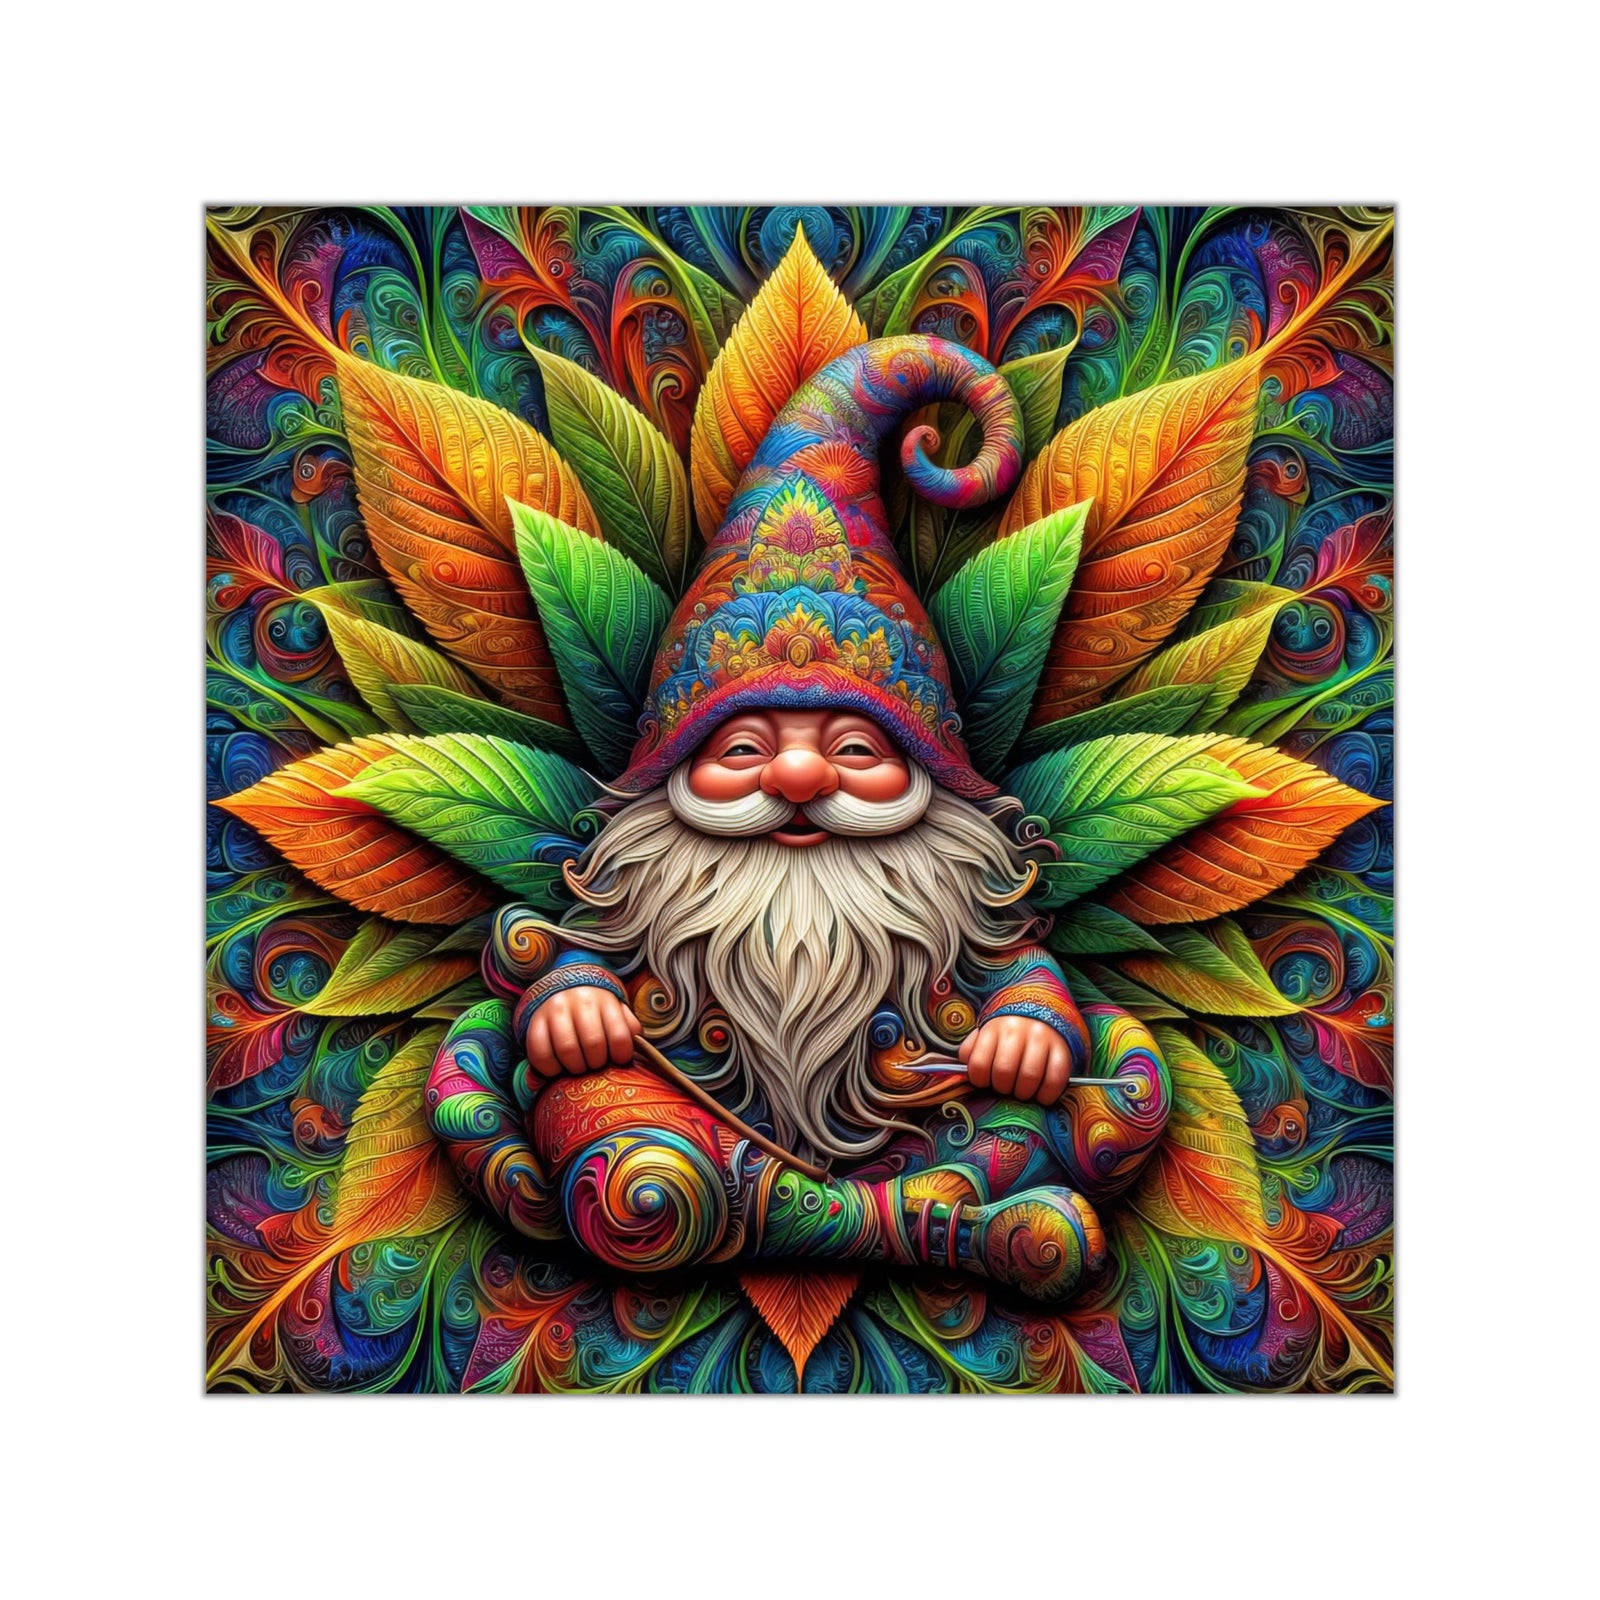 The Gnome's Whimsical Watch Vinyl Stickers